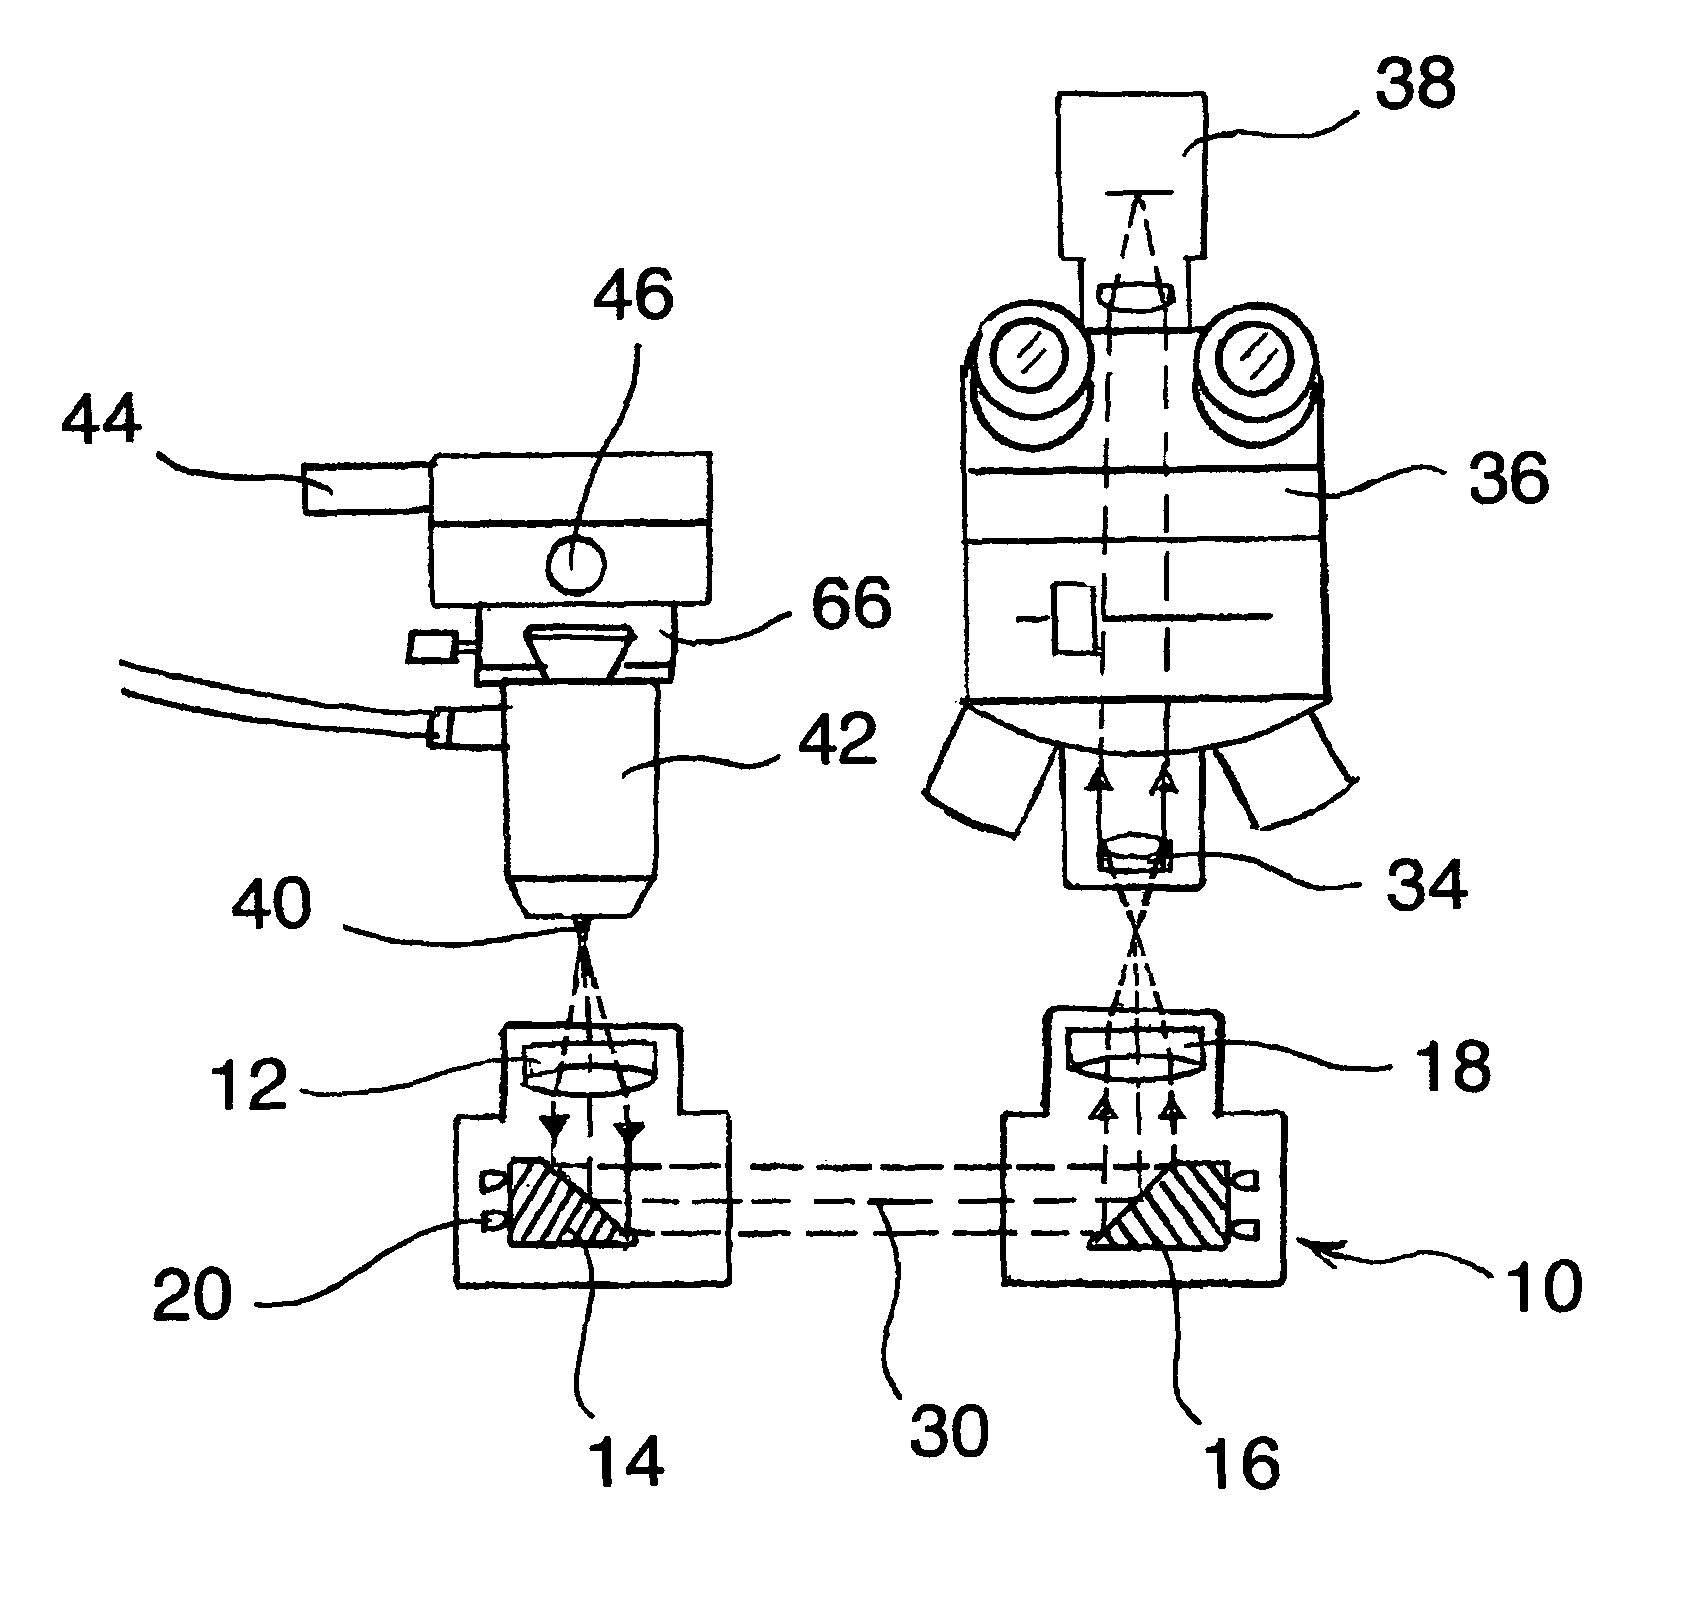 Probe alignment tool for the scanning probe microscope